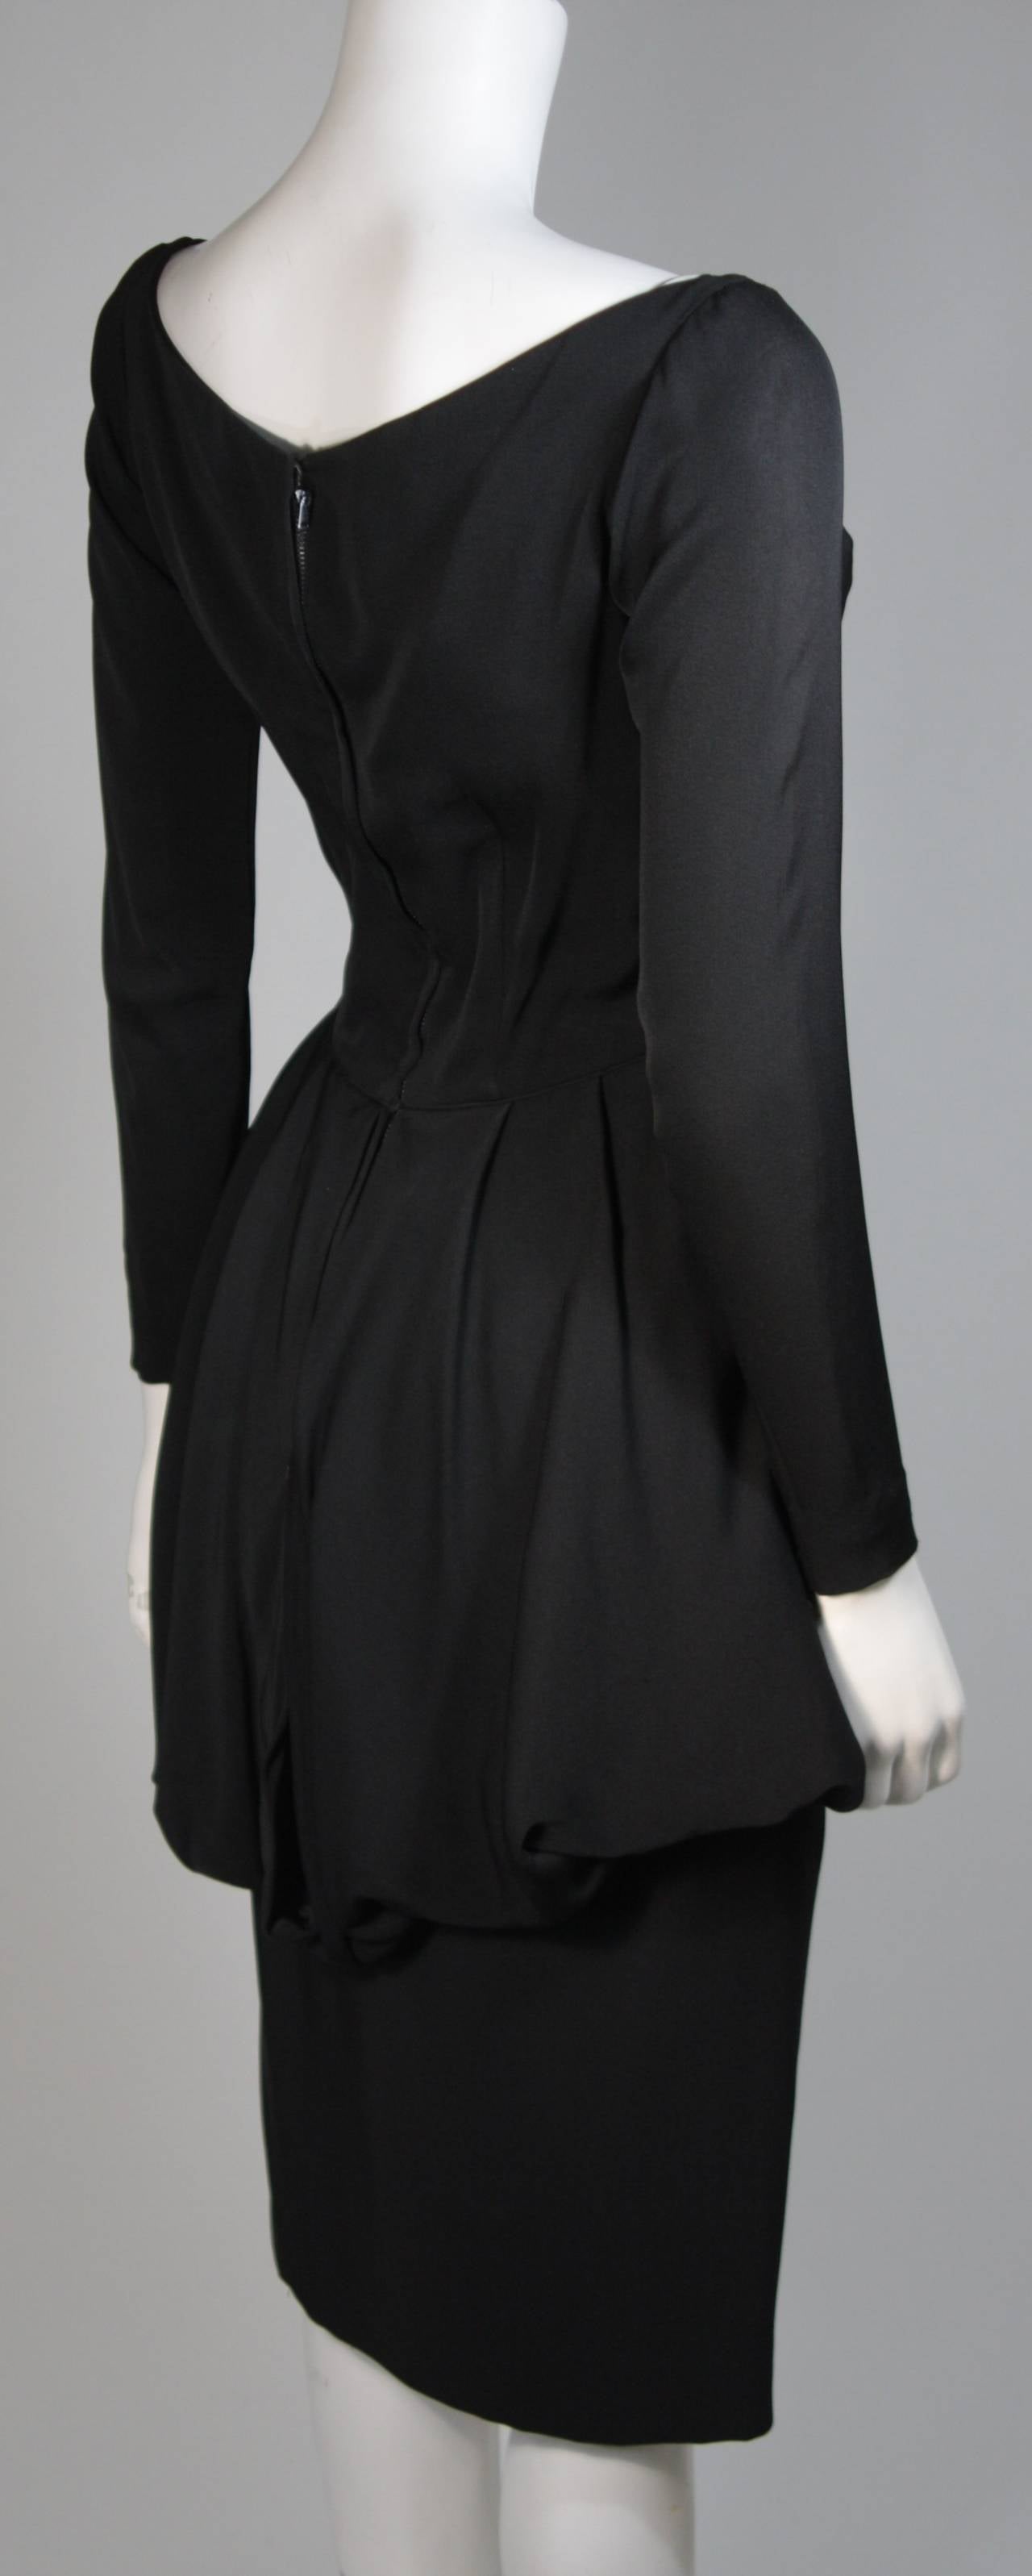 Ceil Chapman 1950's Black Cocktail Dress with Draped Peplum Detail Size Small For Sale 3